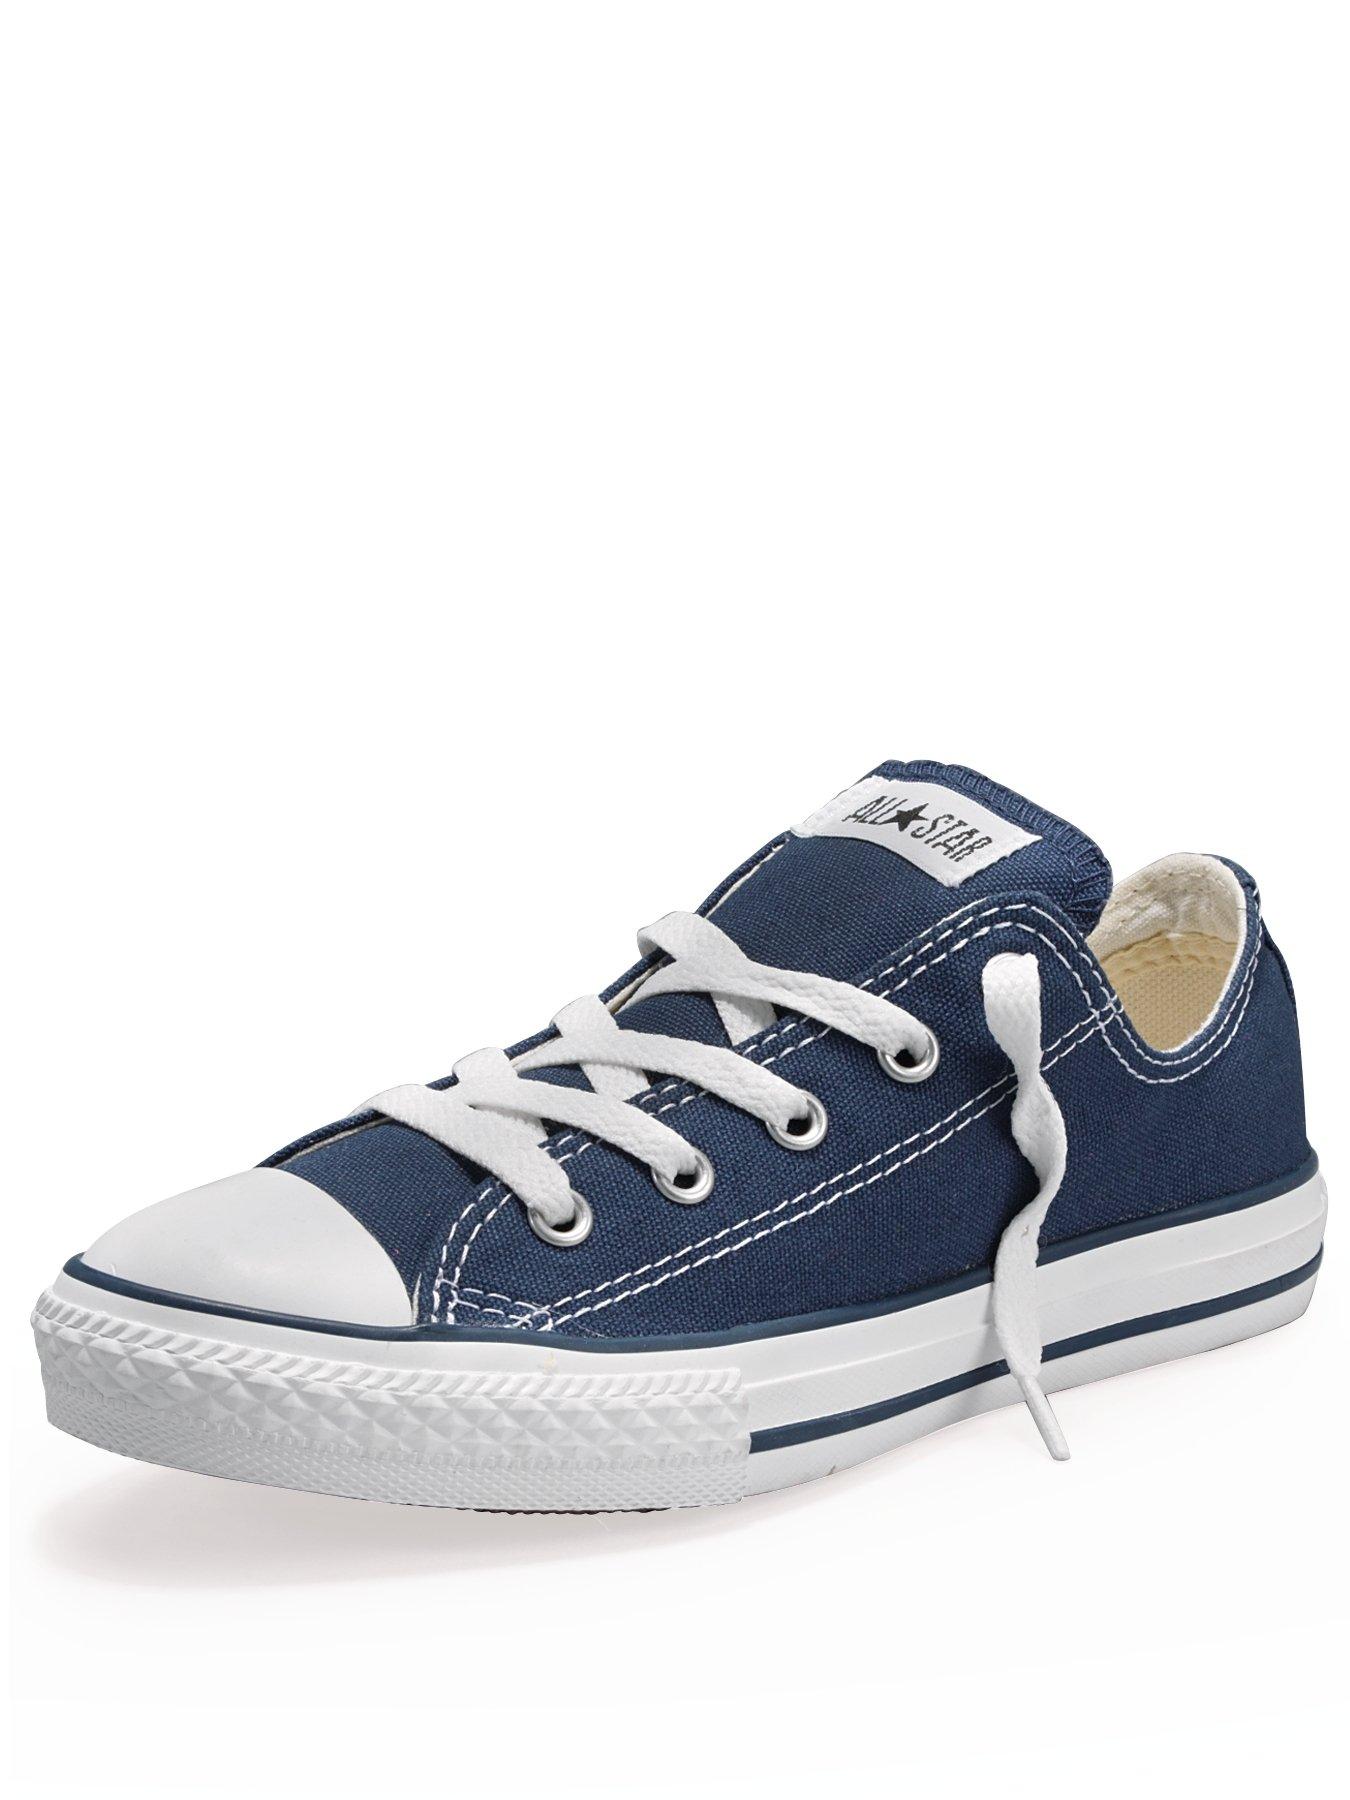 Kids Chuck Taylor All Star Ox Childrens Unisex Trainers -Navy